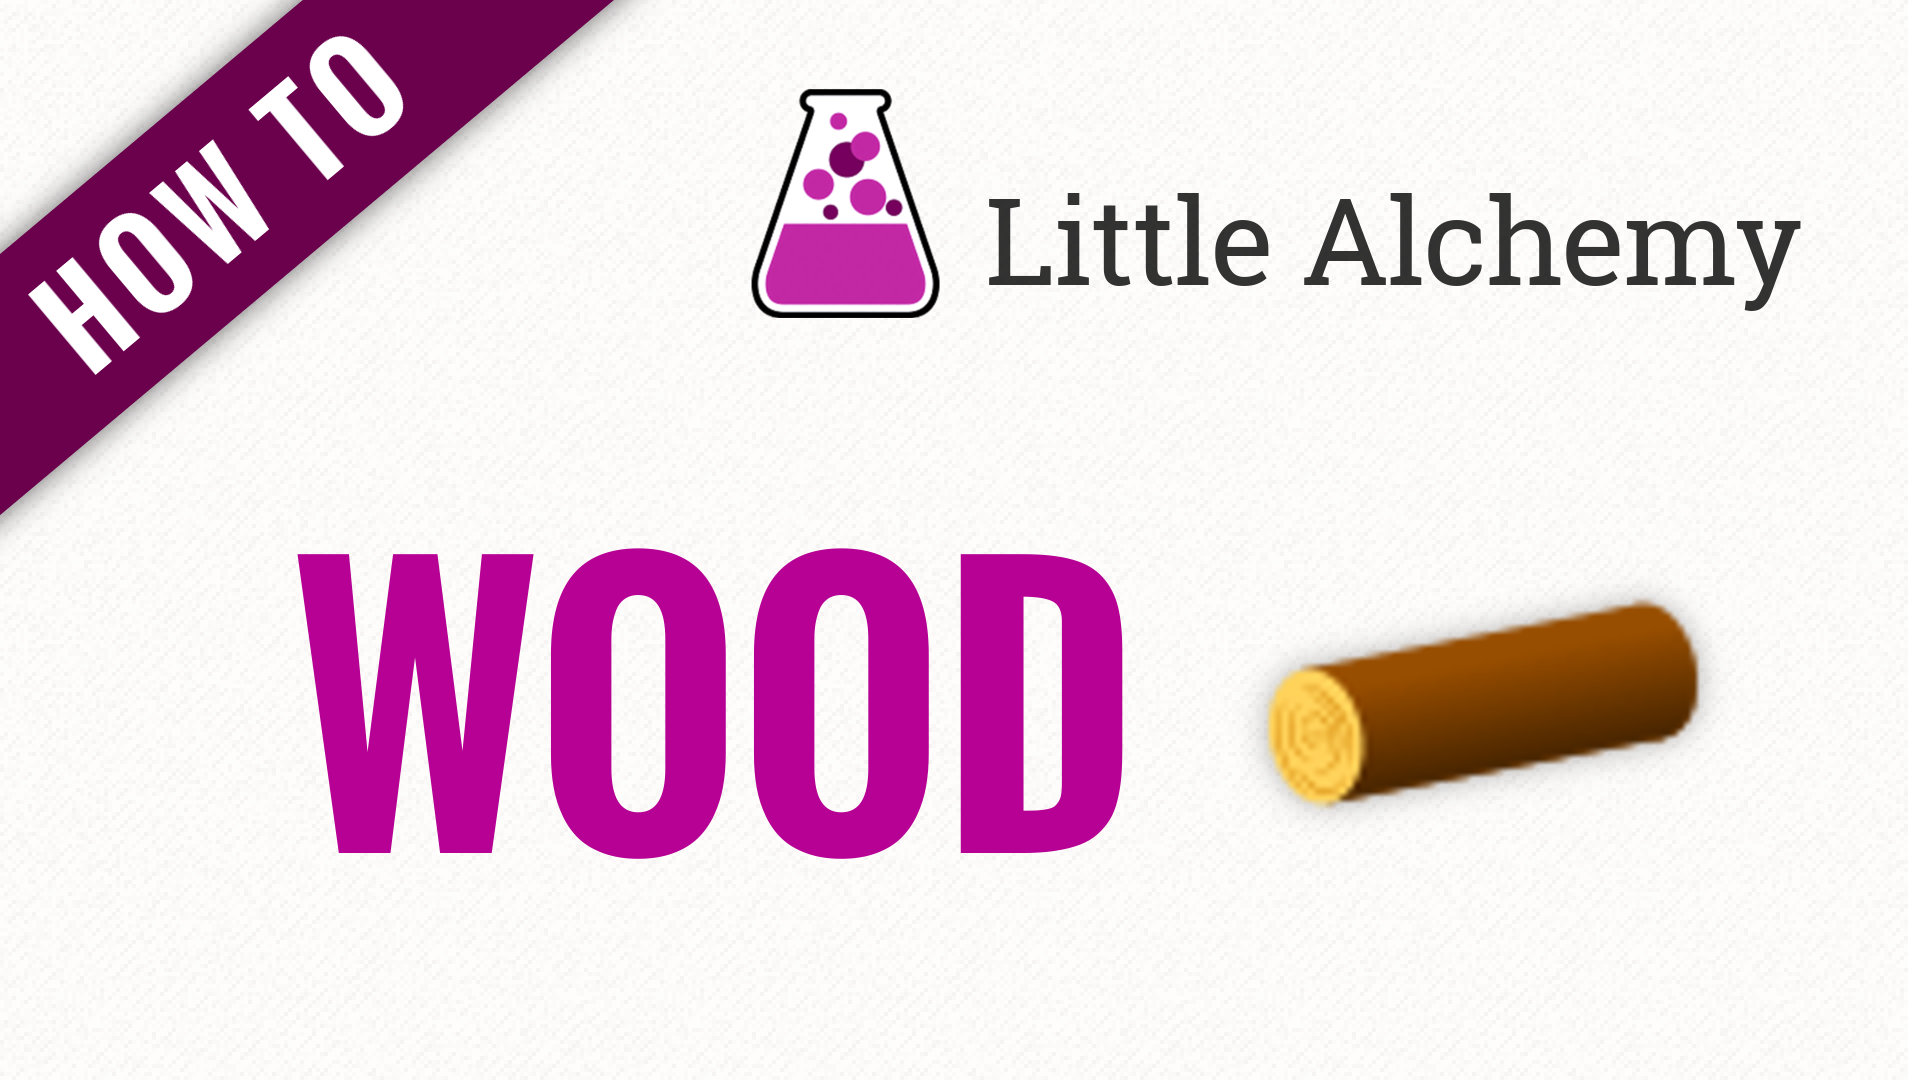 how to make wood in little alchemy